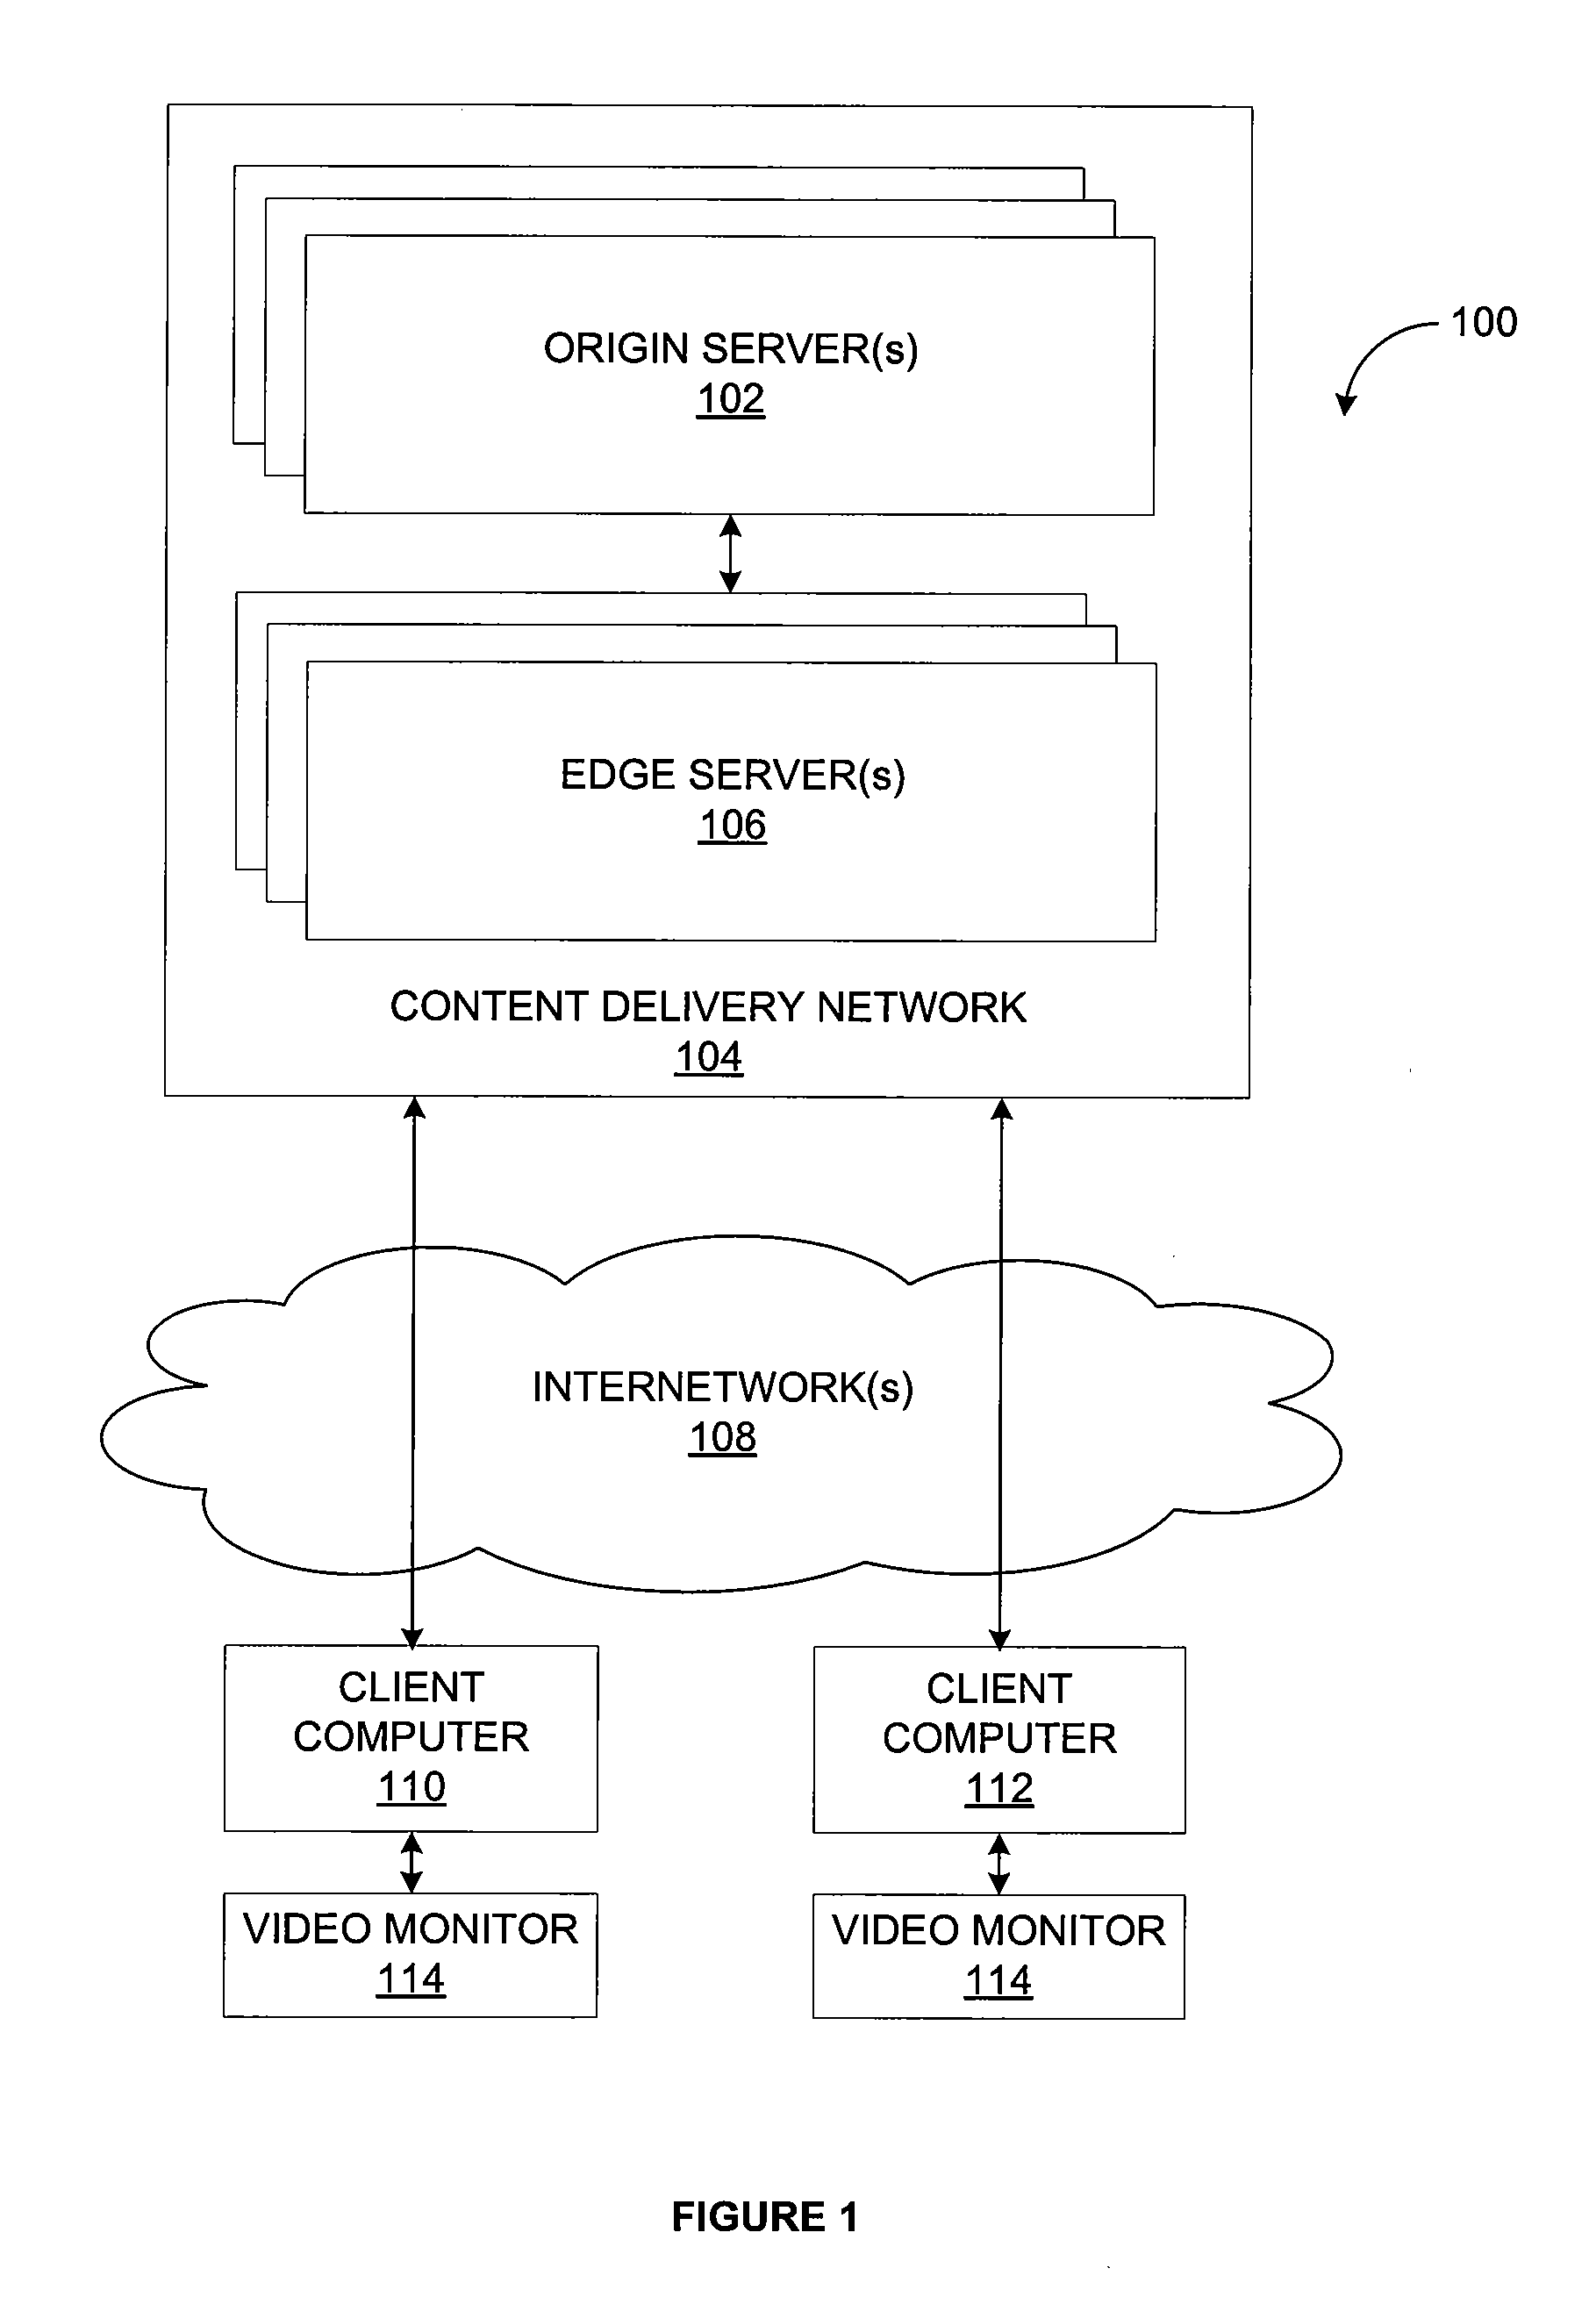 Client-server signaling in content distribution networks